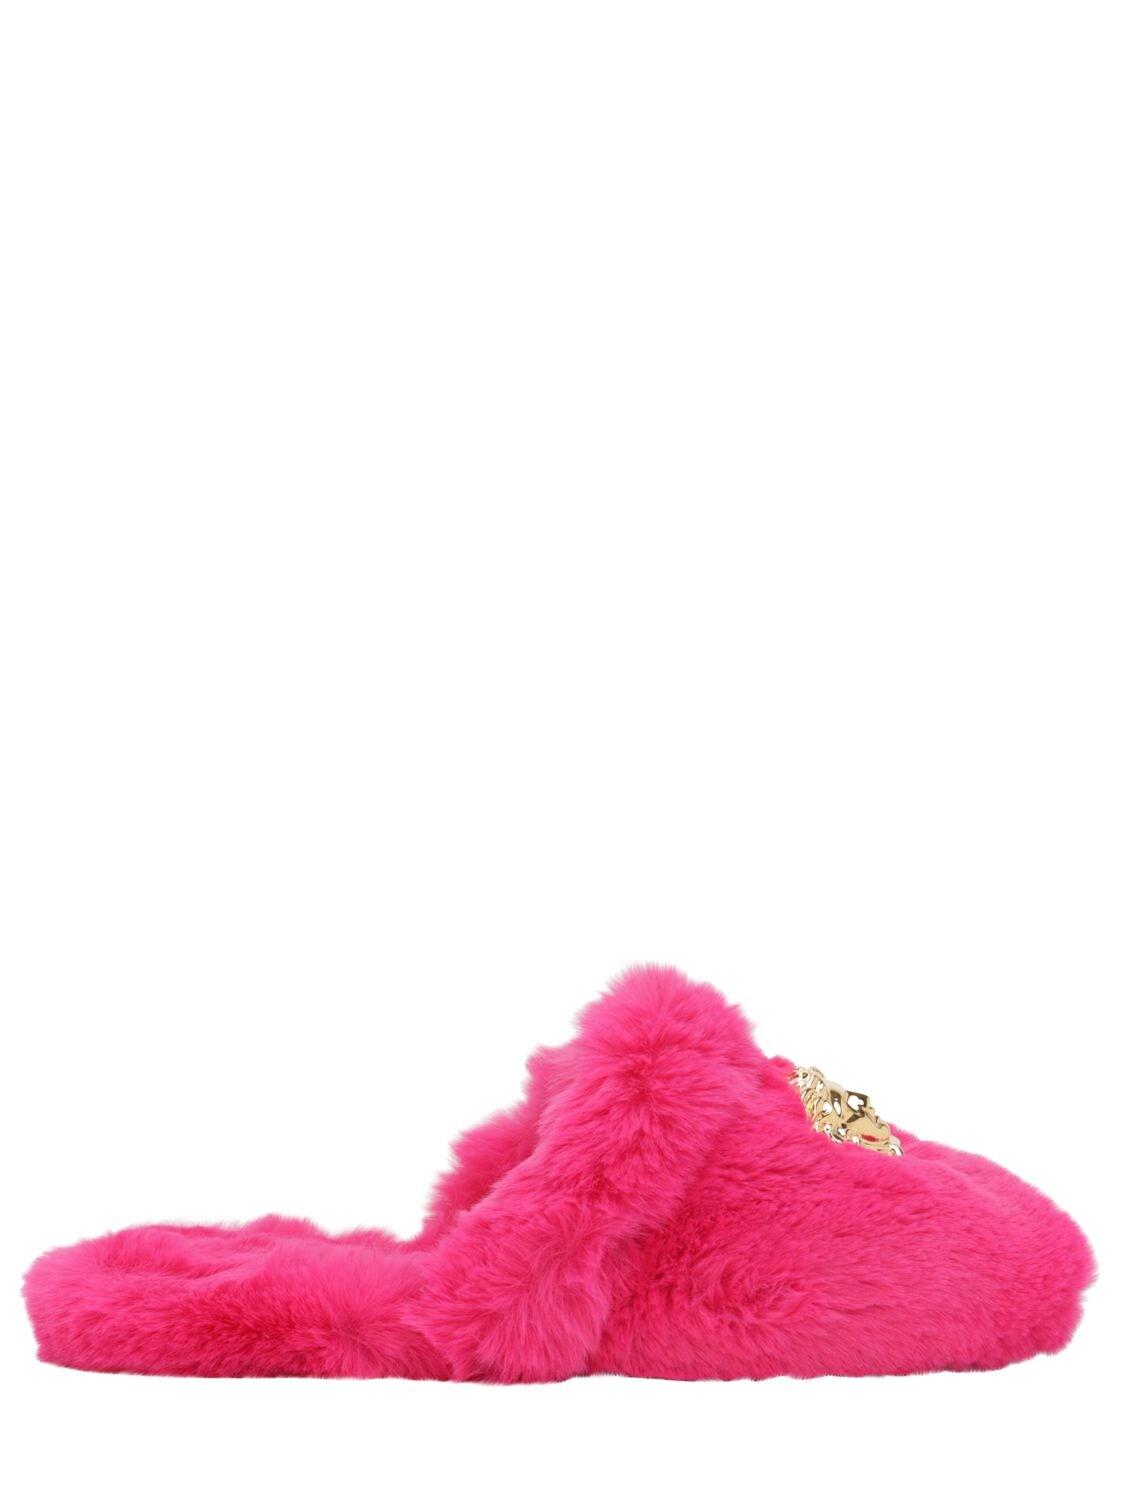 Versace Medusa Faux Fur Slippers in Fuchsia,Gold (Pink) - Lyst